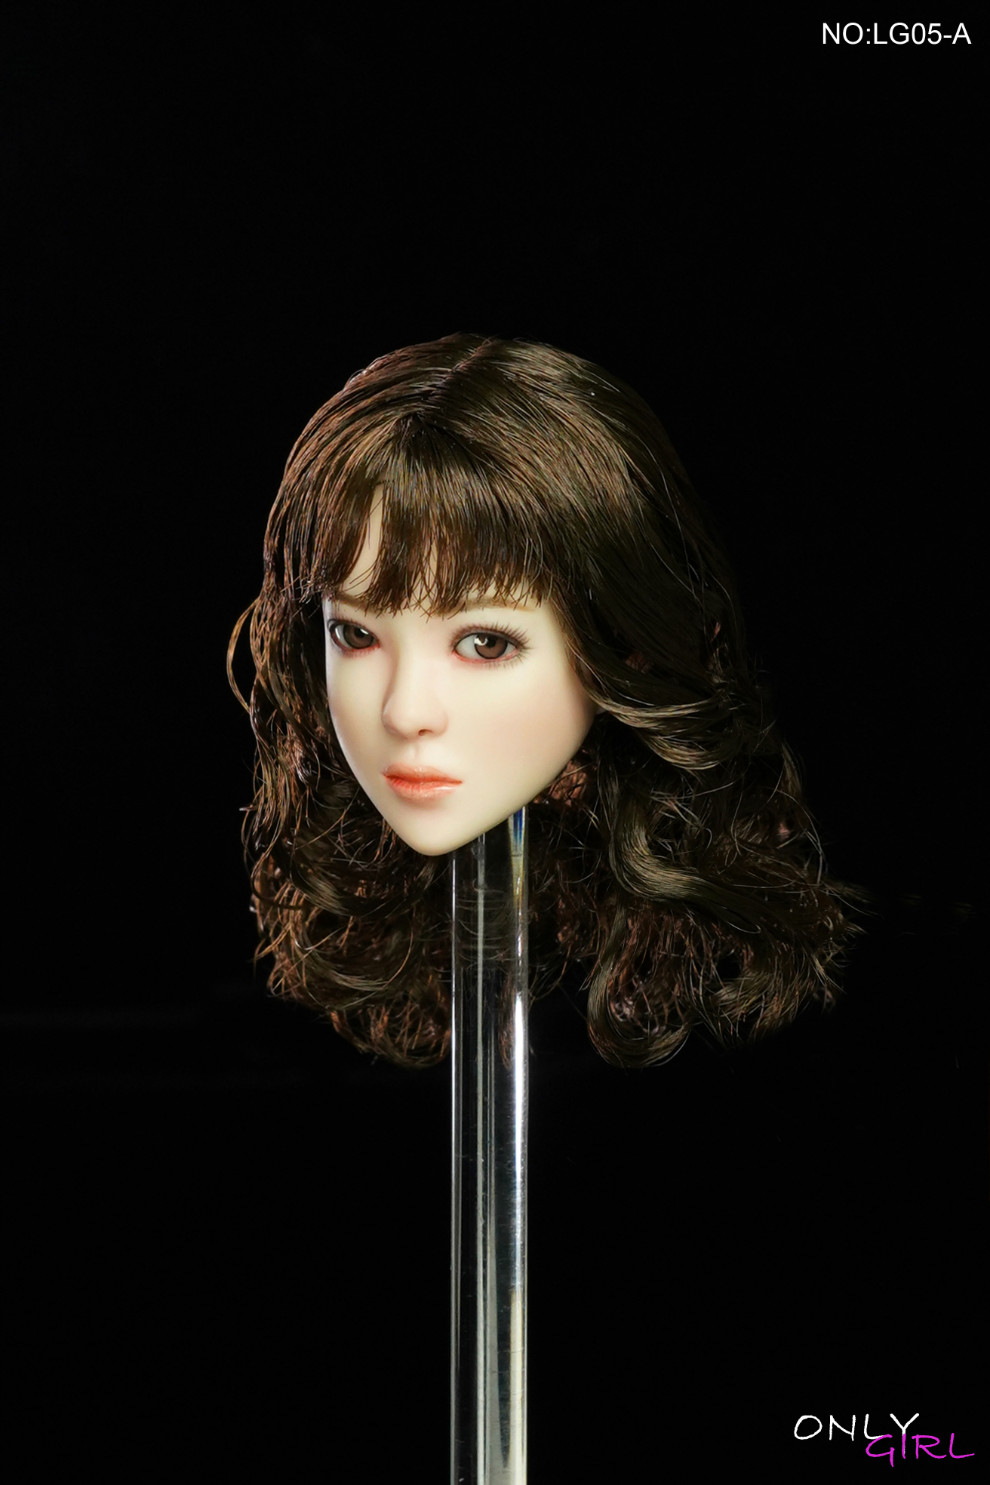 young - NEW PRODUCT: ONLYGIRL: 1/6 LG05 movable eye female head carving - ABC three models 4196